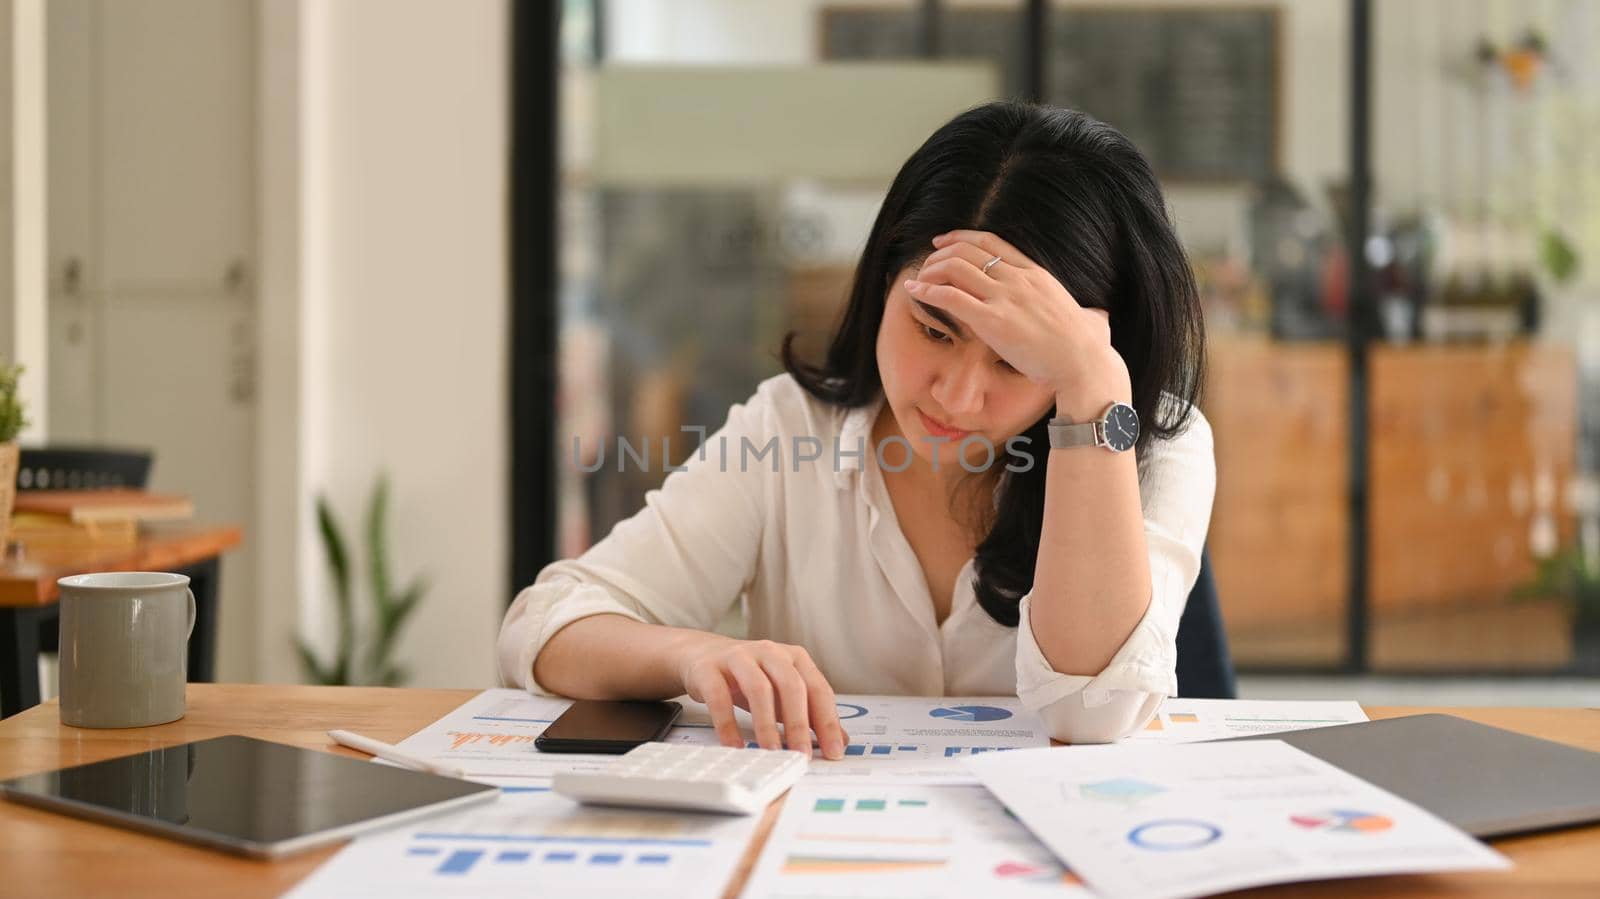 Tired asian woman employee sitting at her office desk, holding her head in hands. Overworking, stress, depression concept by prathanchorruangsak